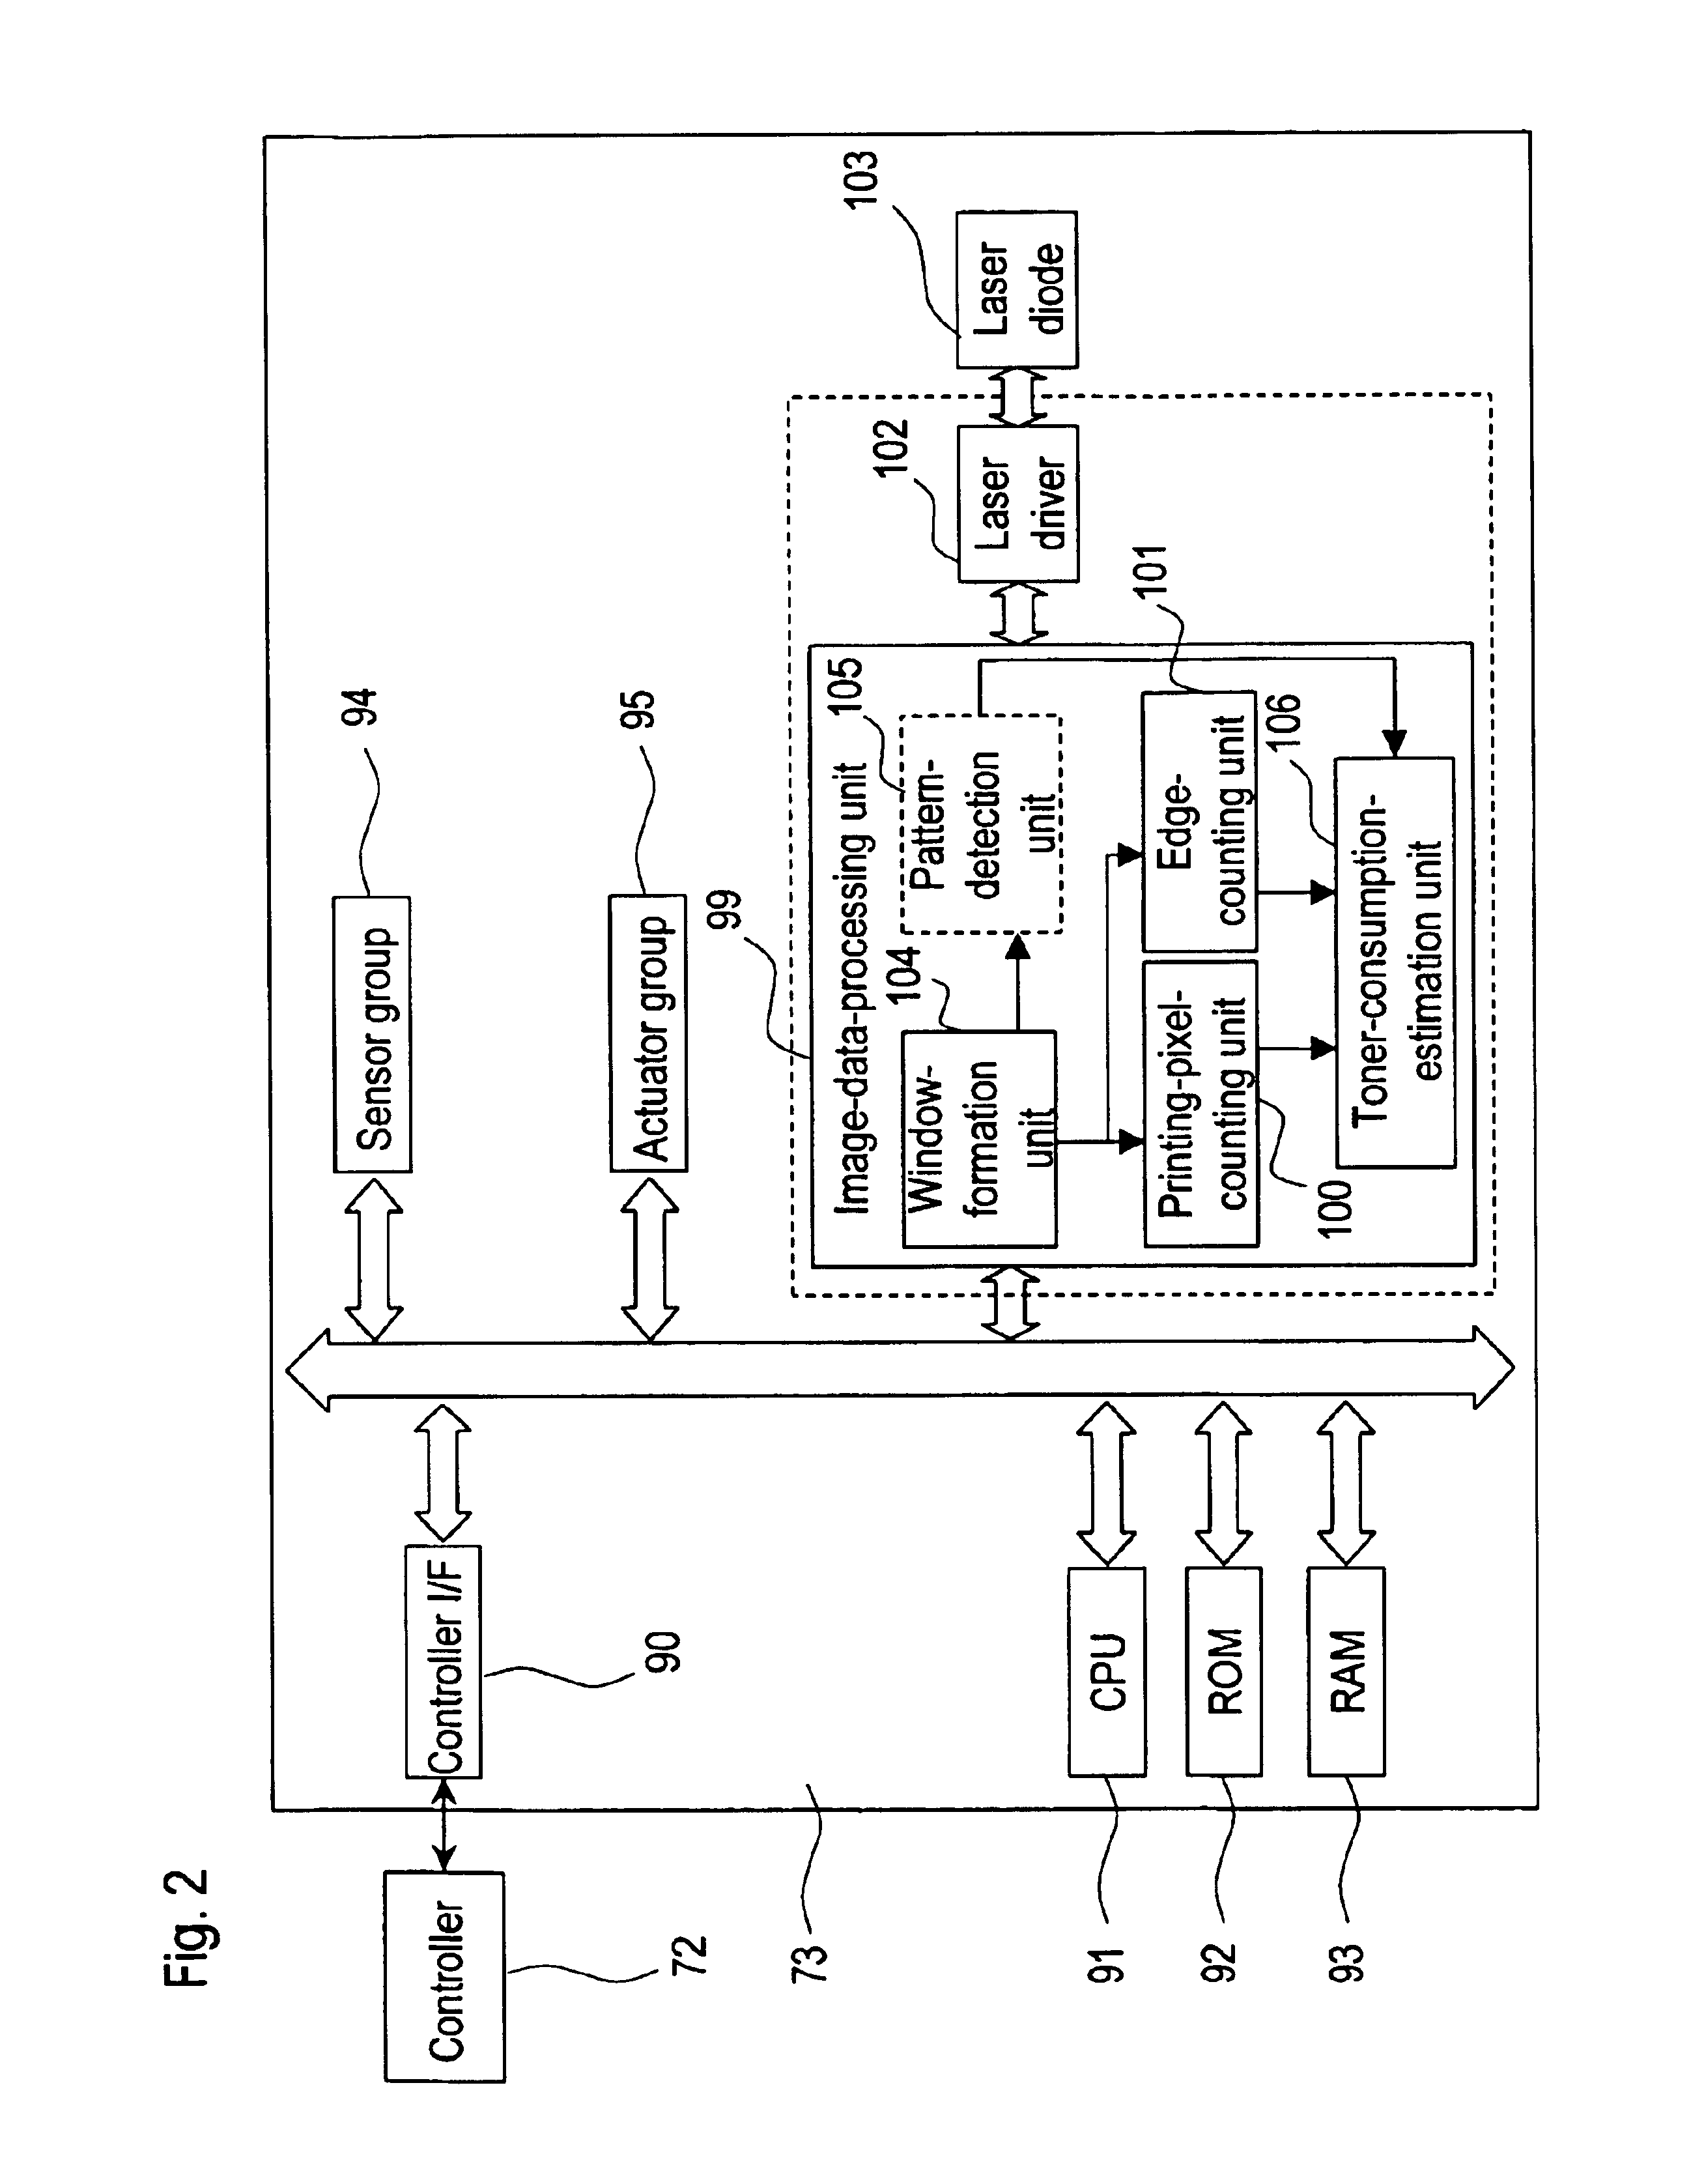 Image forming apparatus and method for estimating the amount of toner consumption